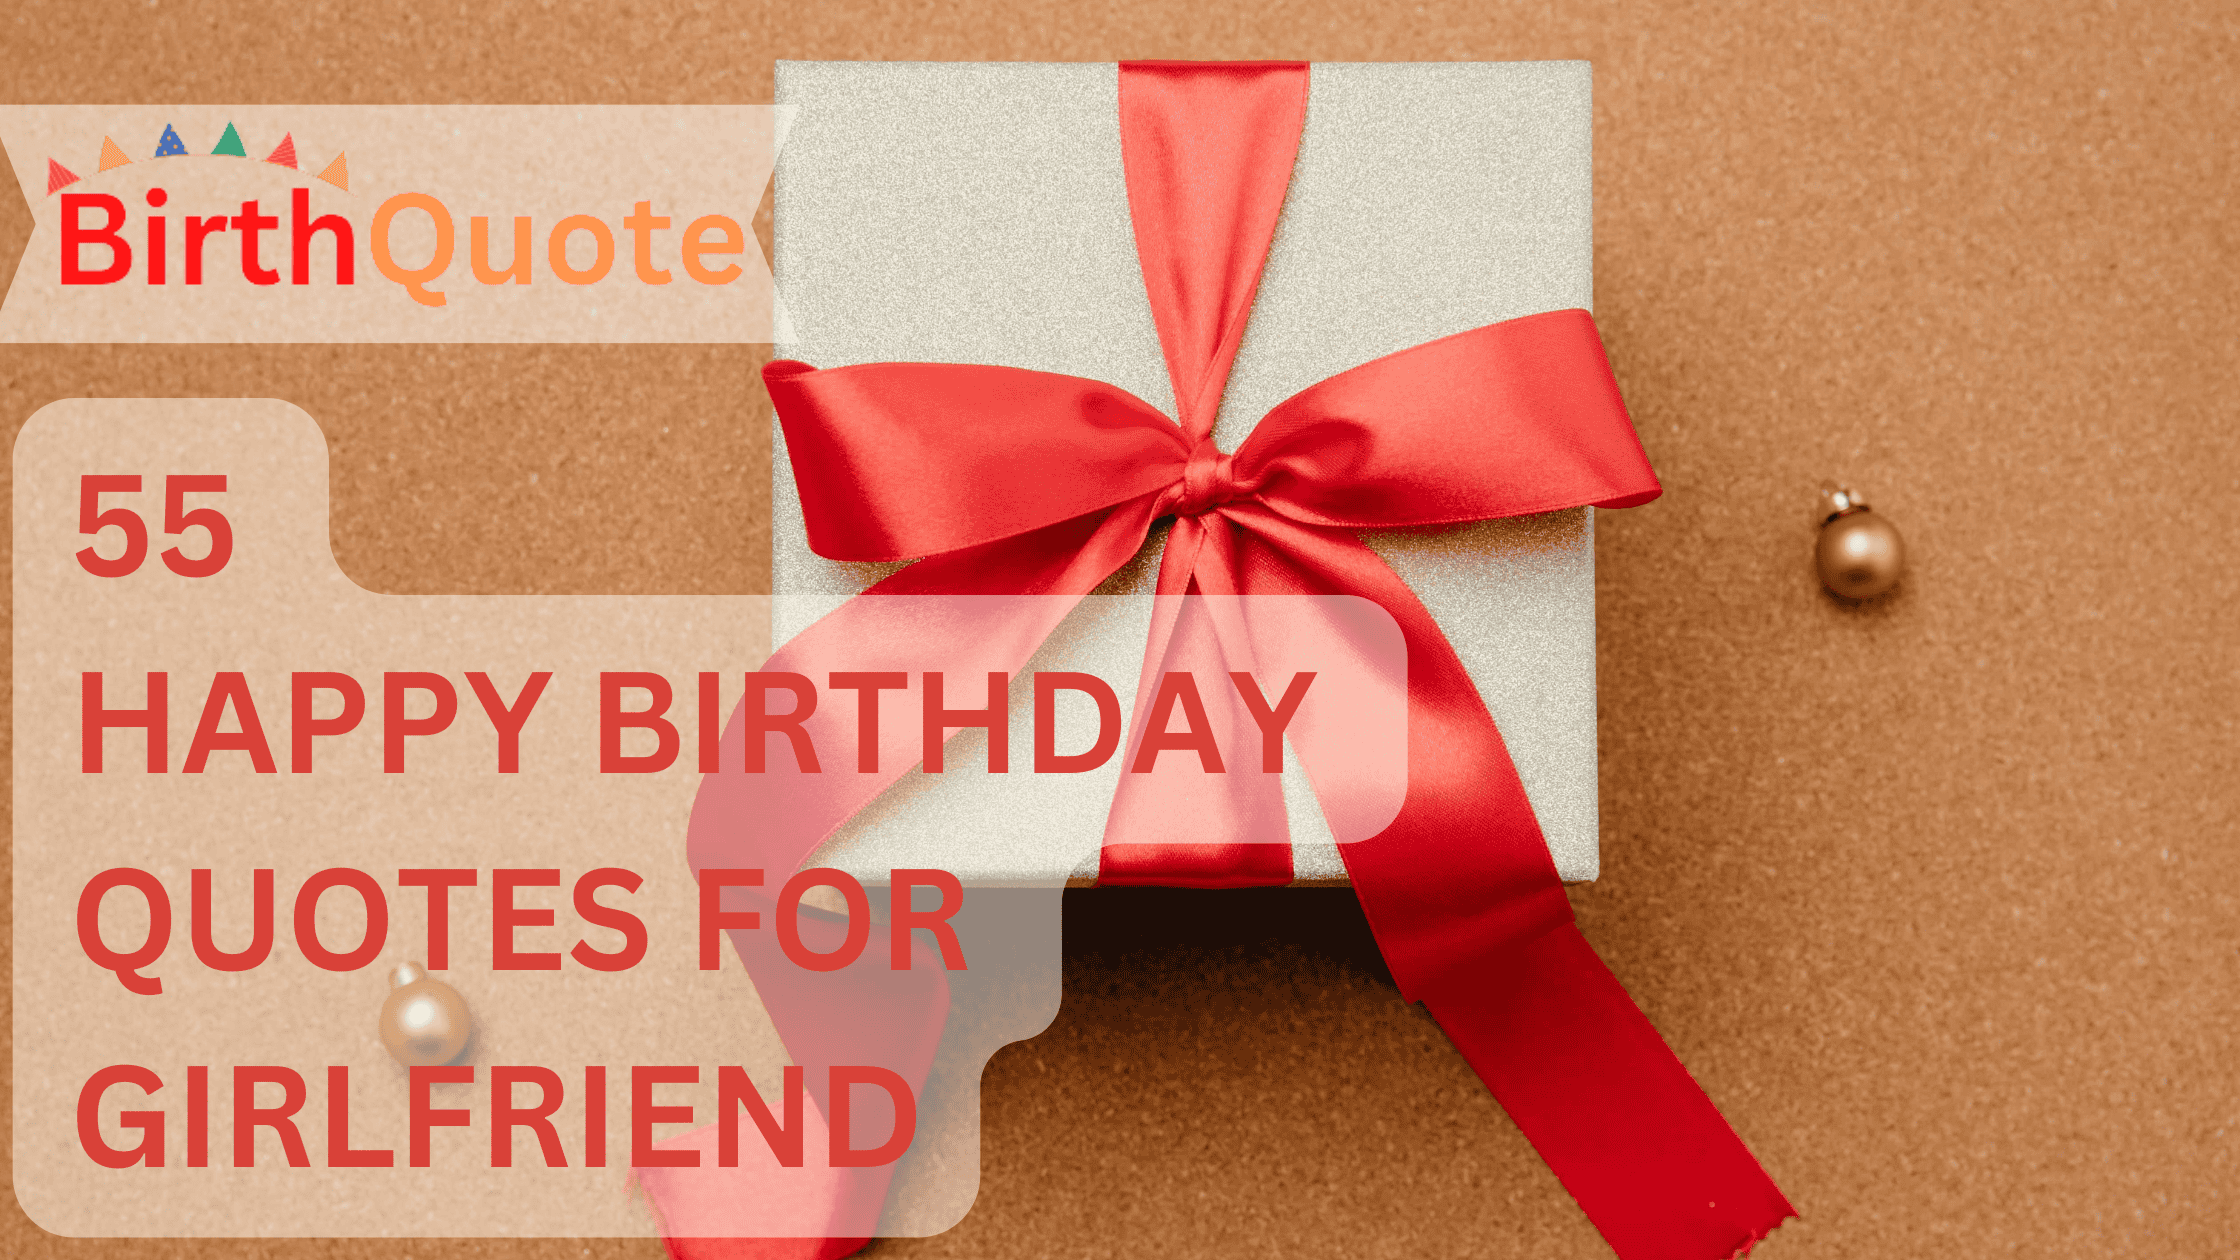 Happy Birthday Quotes for Girlfriend